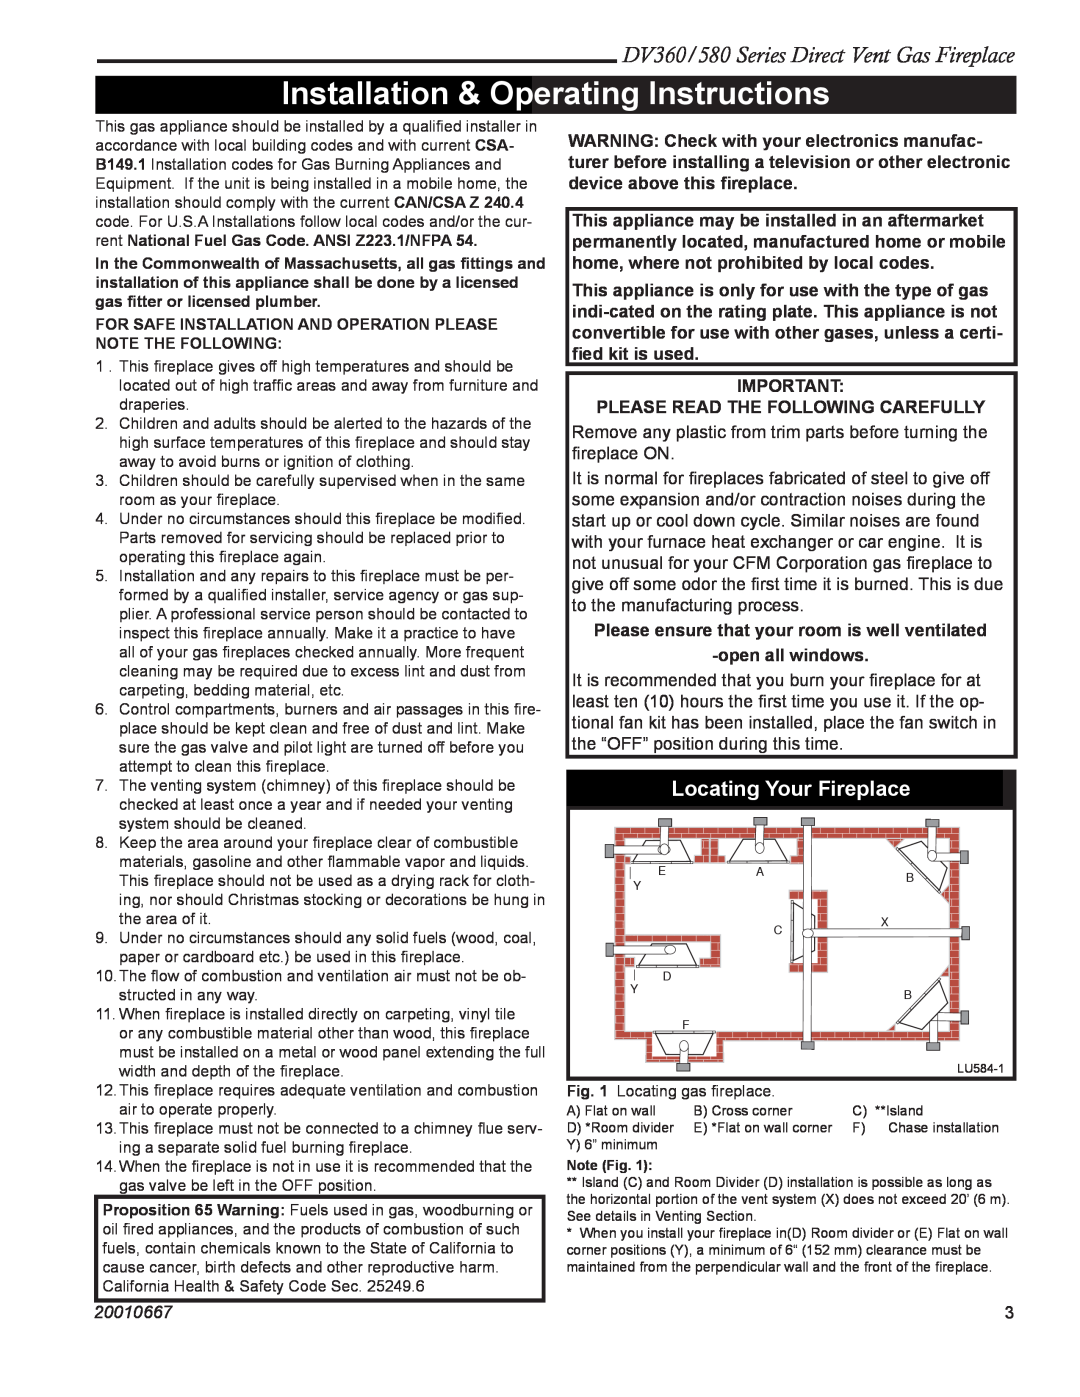 Vermont Casting DV580, DV360 manual Installation & Operating Instructions, Locating Your Fireplace, 20010667 